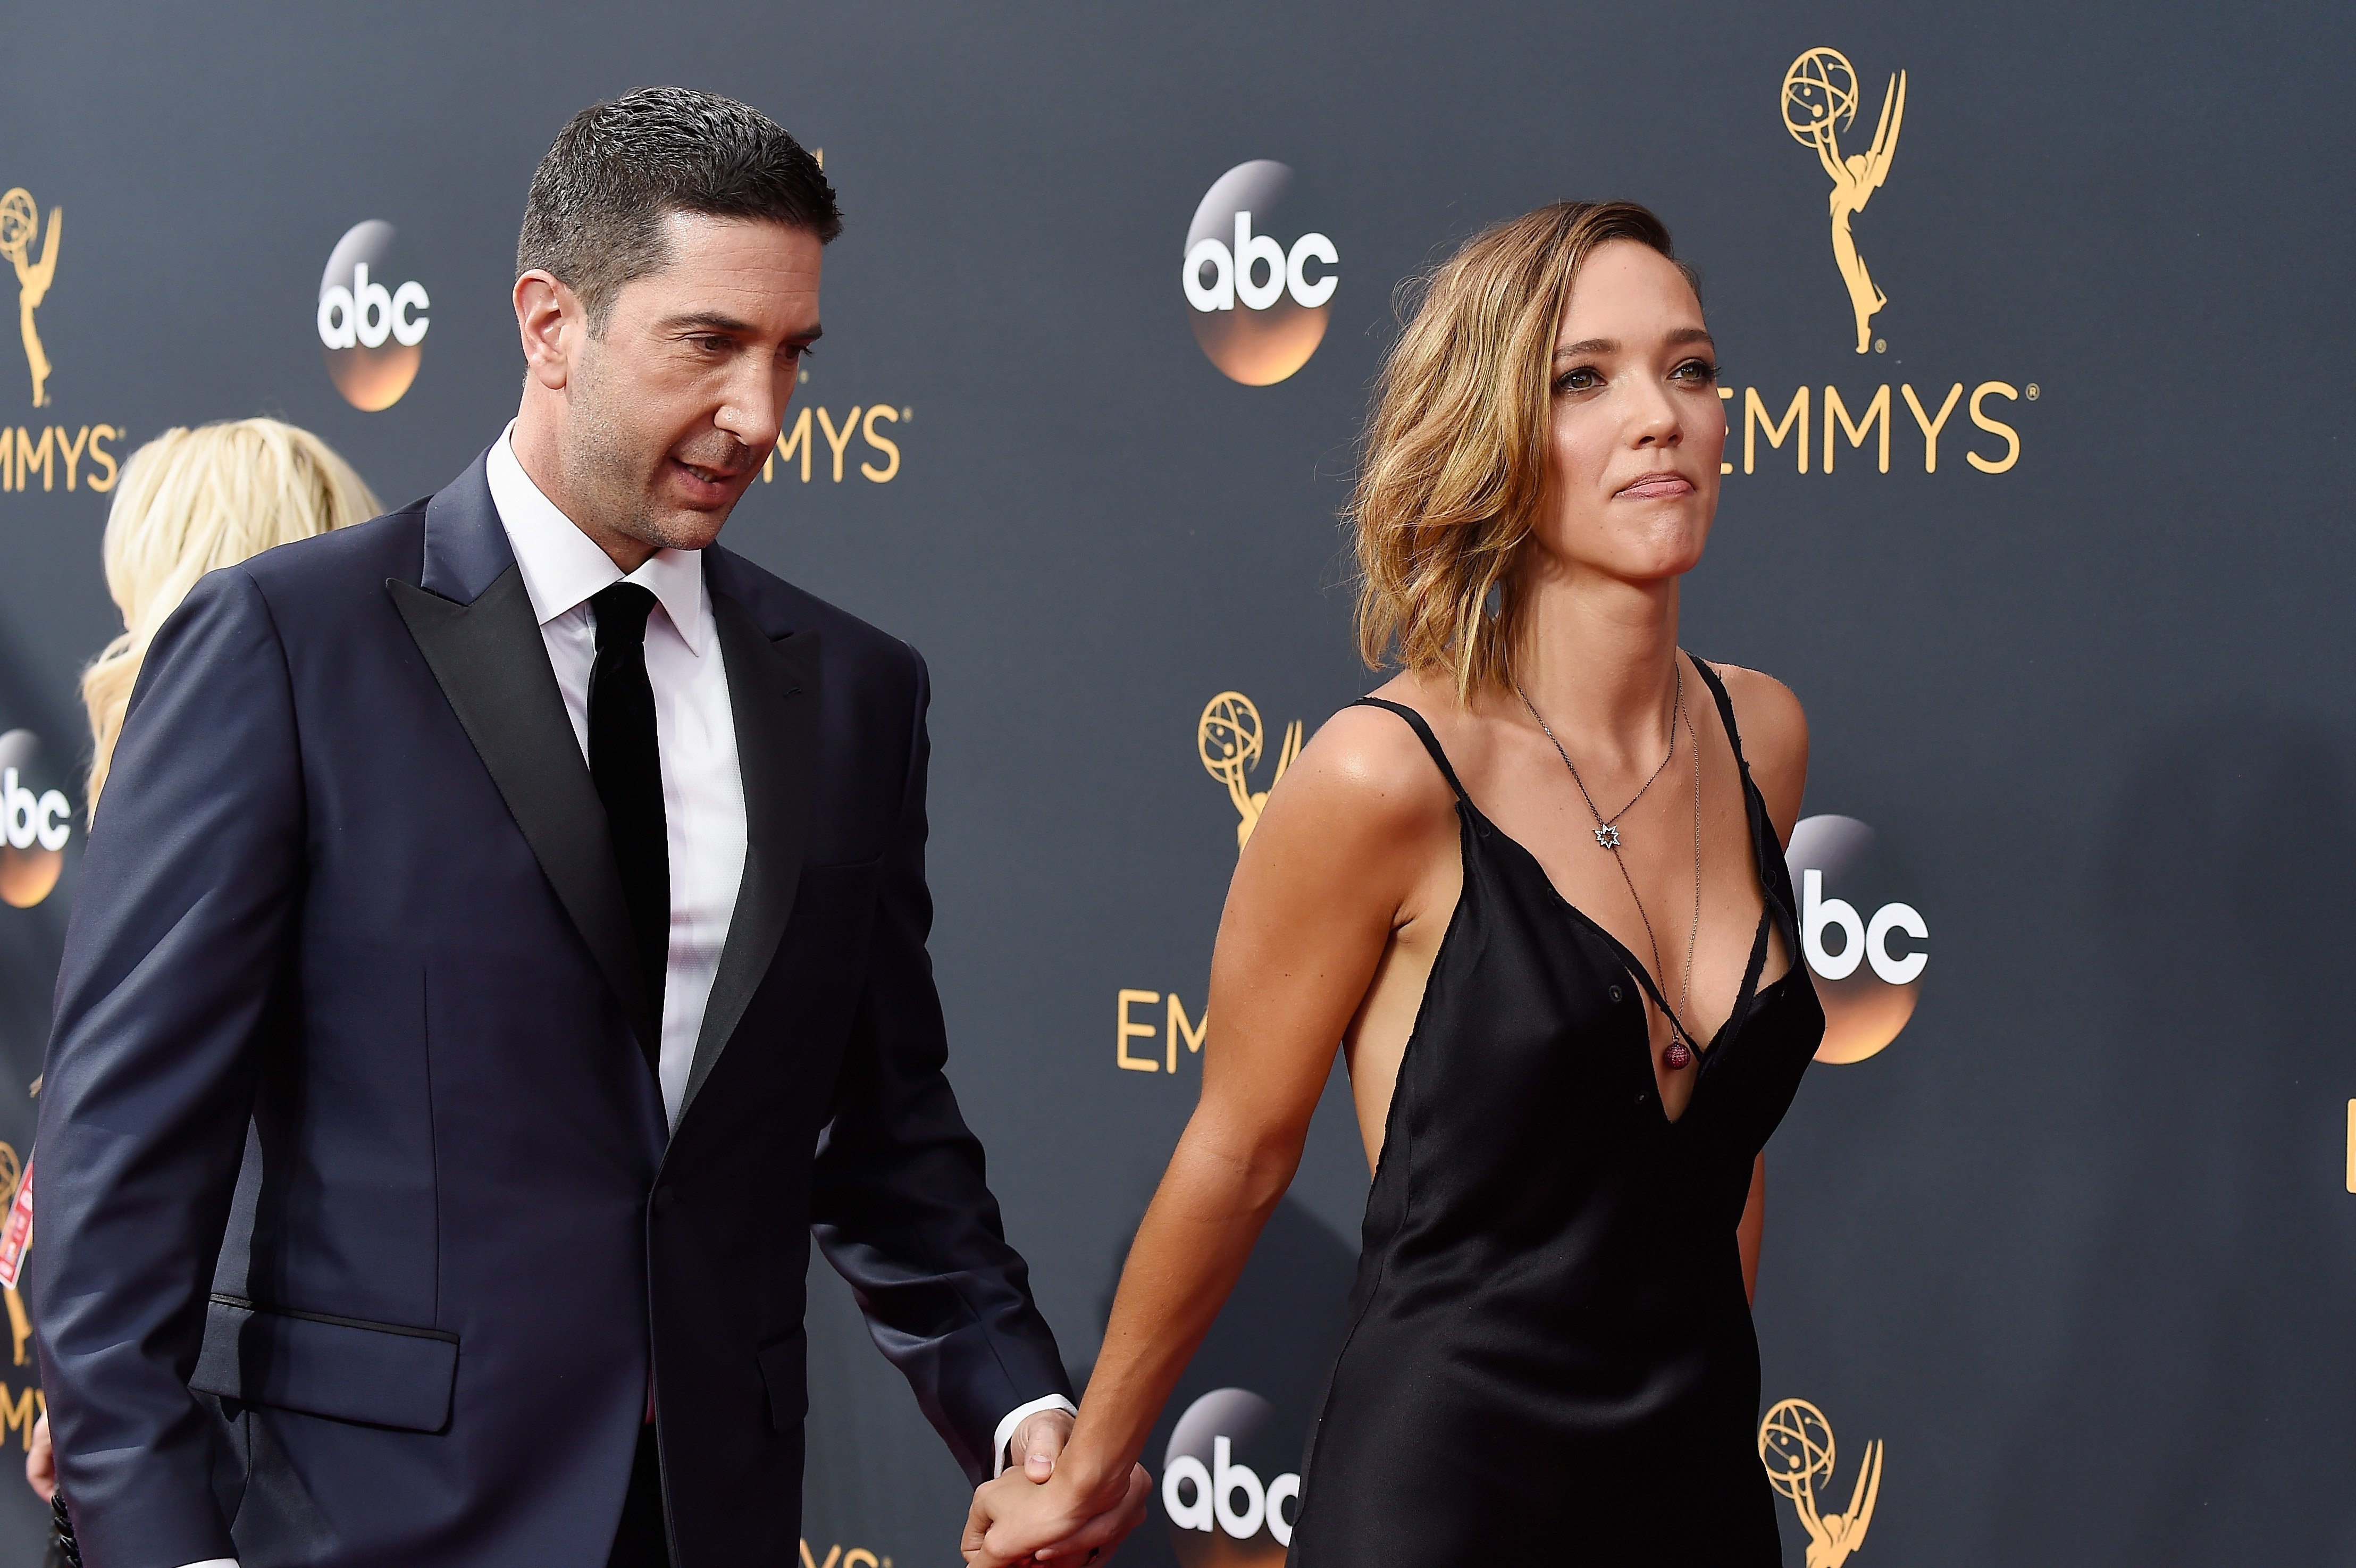 David Schwimmer and Zoë Buckman arrive at the 68th Annual Primetime Emmy Awards on September 18, 2016, in Los Angeles, California. | Source: Getty Images